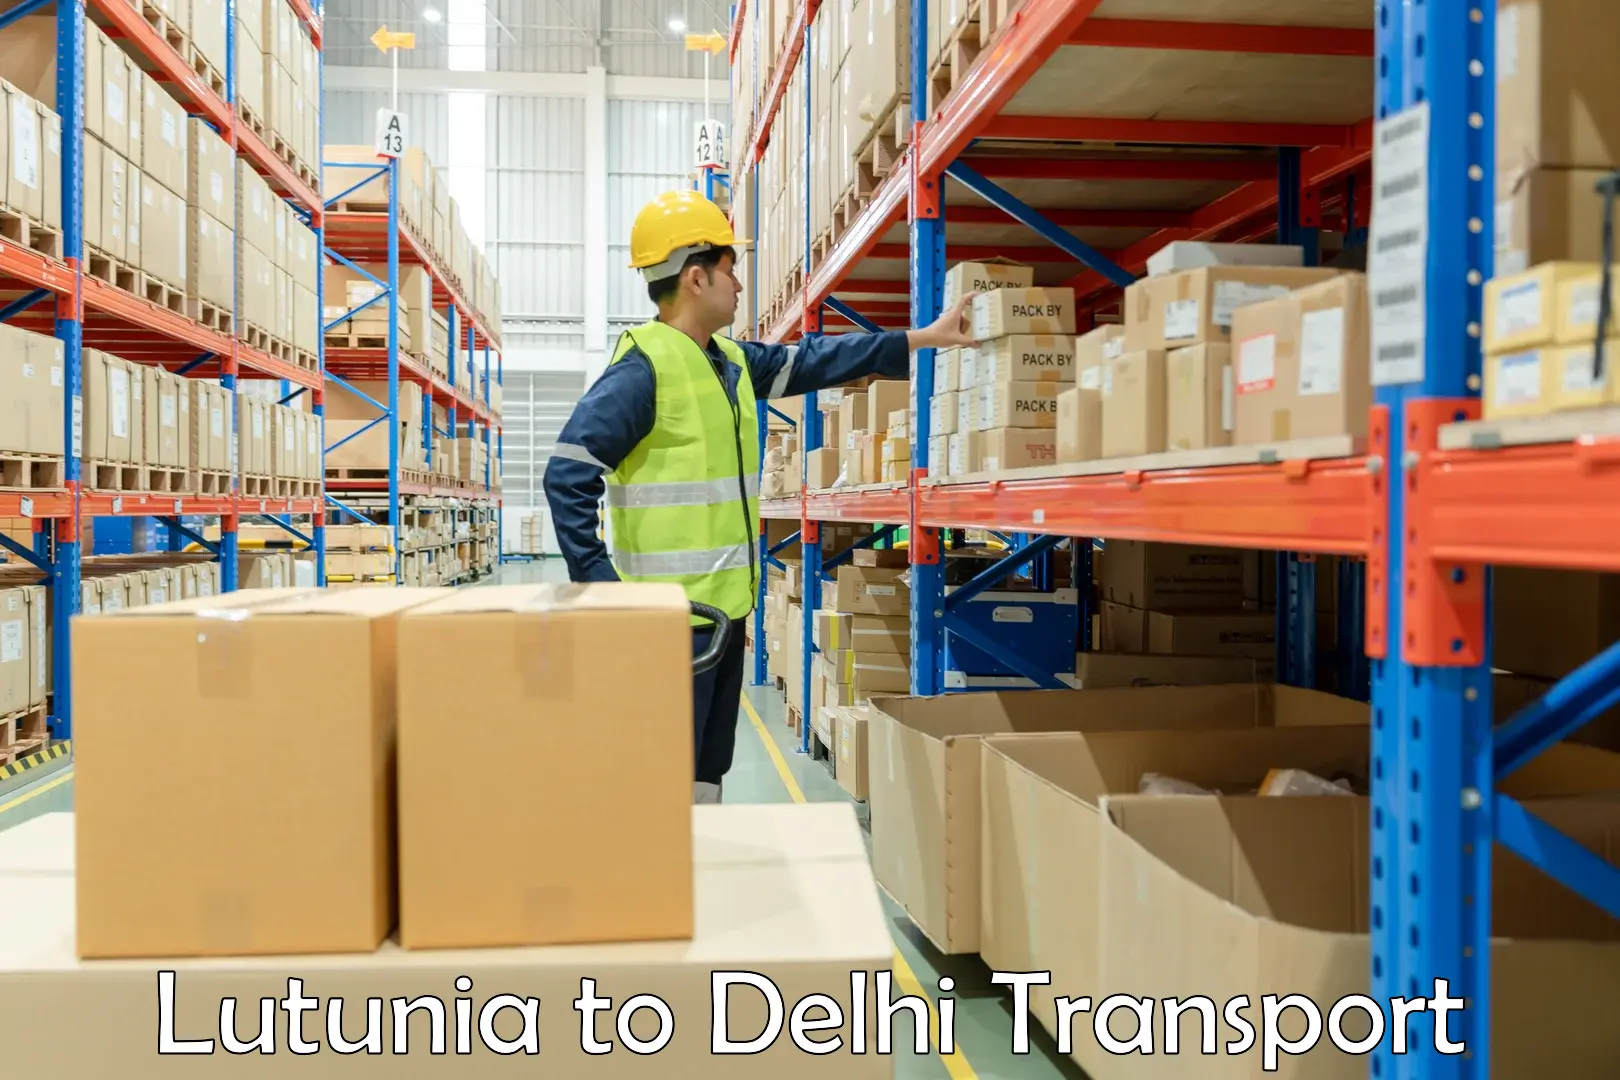 Lorry transport service Lutunia to East Delhi